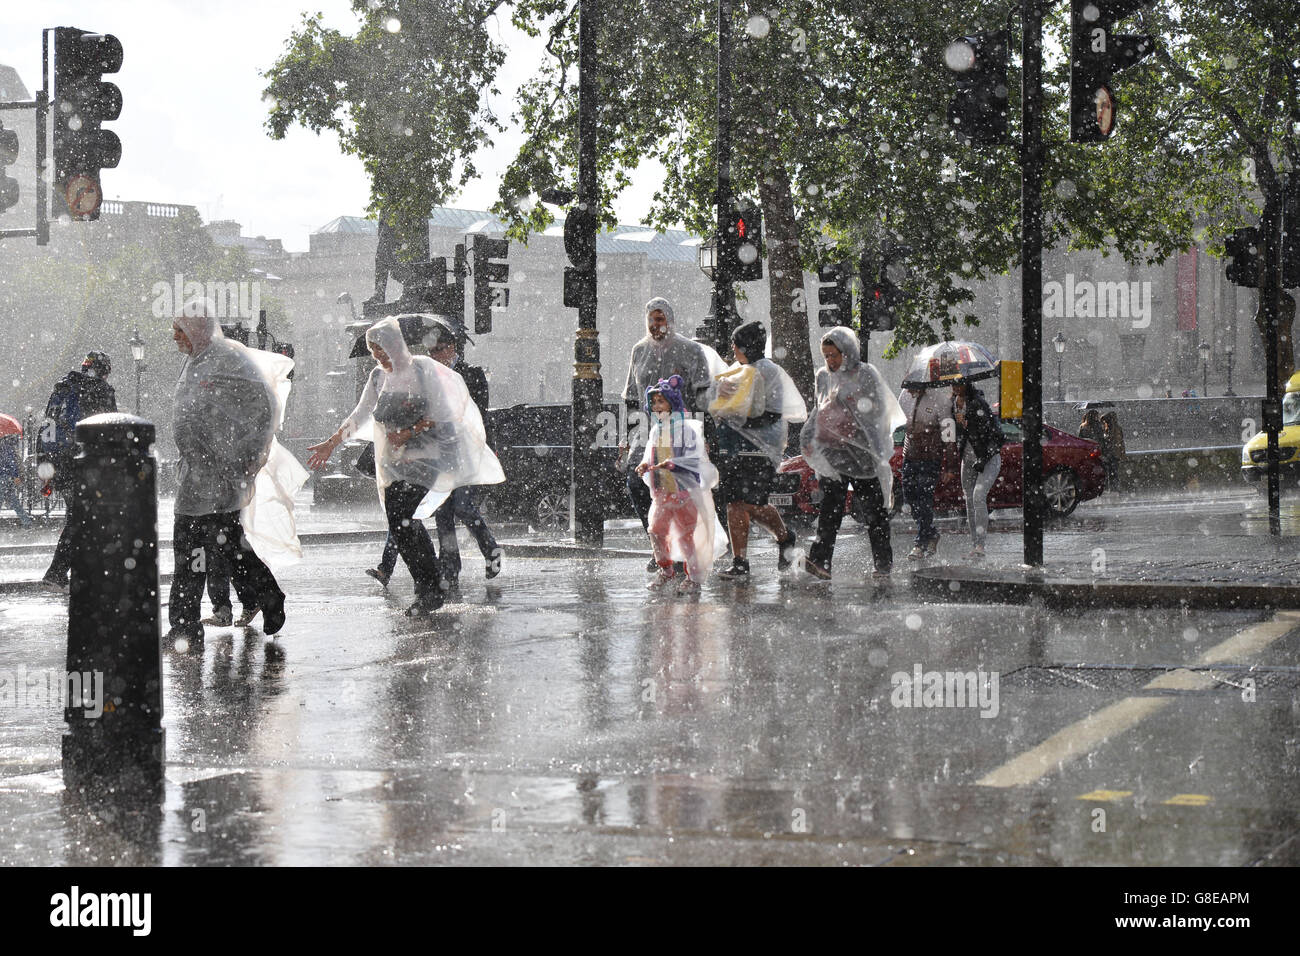 Trafalgar Square, London, UK. Sunshine follows a torrential downpour of rain in central London. © Matthew Chattle/Alamy Live New Stock Photo